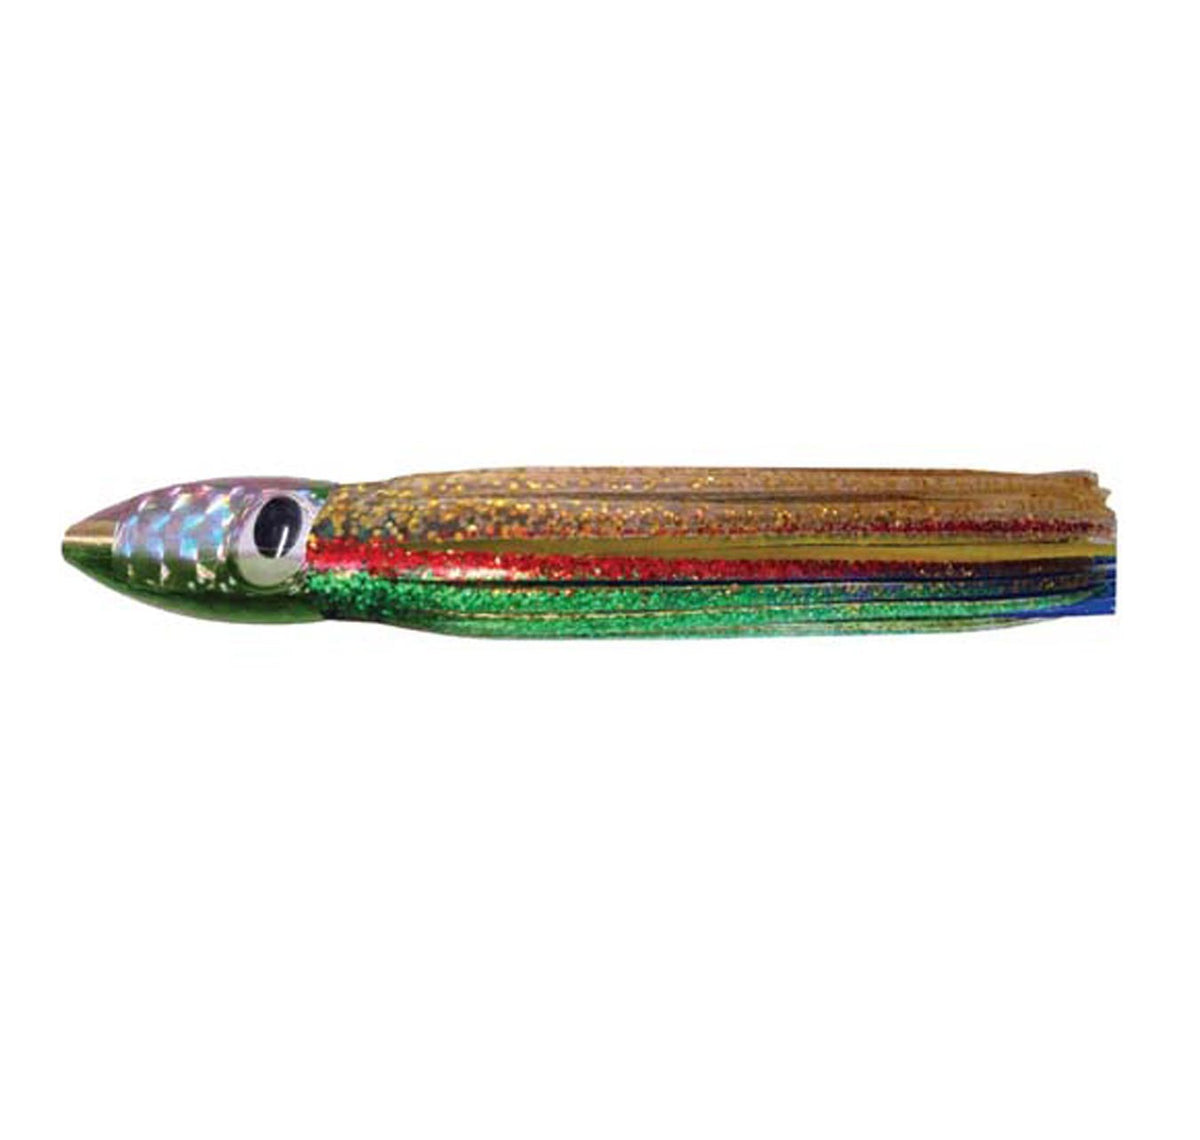 Entice Scud 10&quot; Skirted Lures